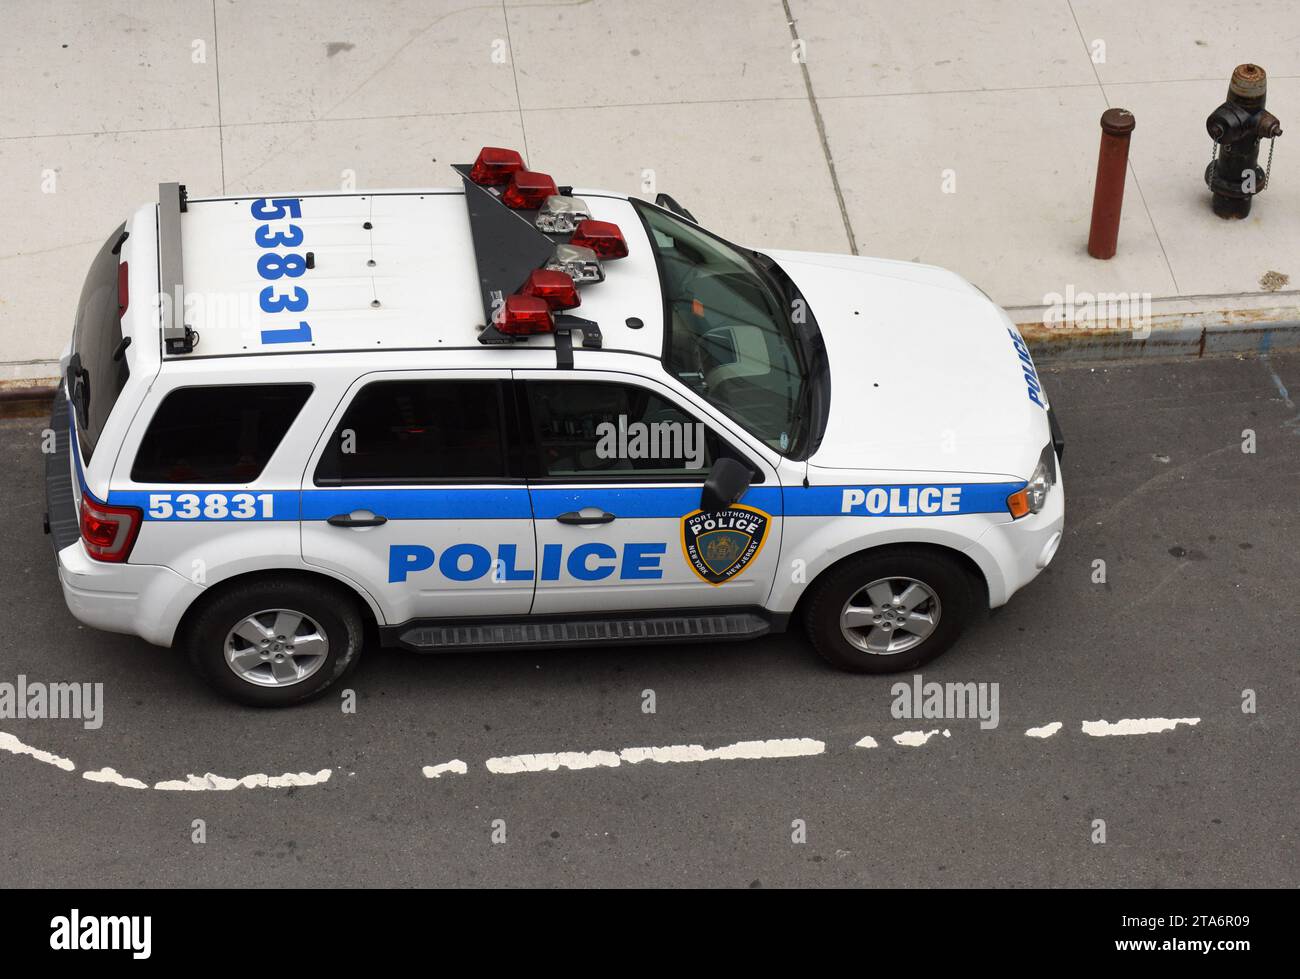 NEW YORK, USA - June 10, 2018: Police car of the New York City Police Department (NYPD) on the streets of Manhattan. Stock Photo